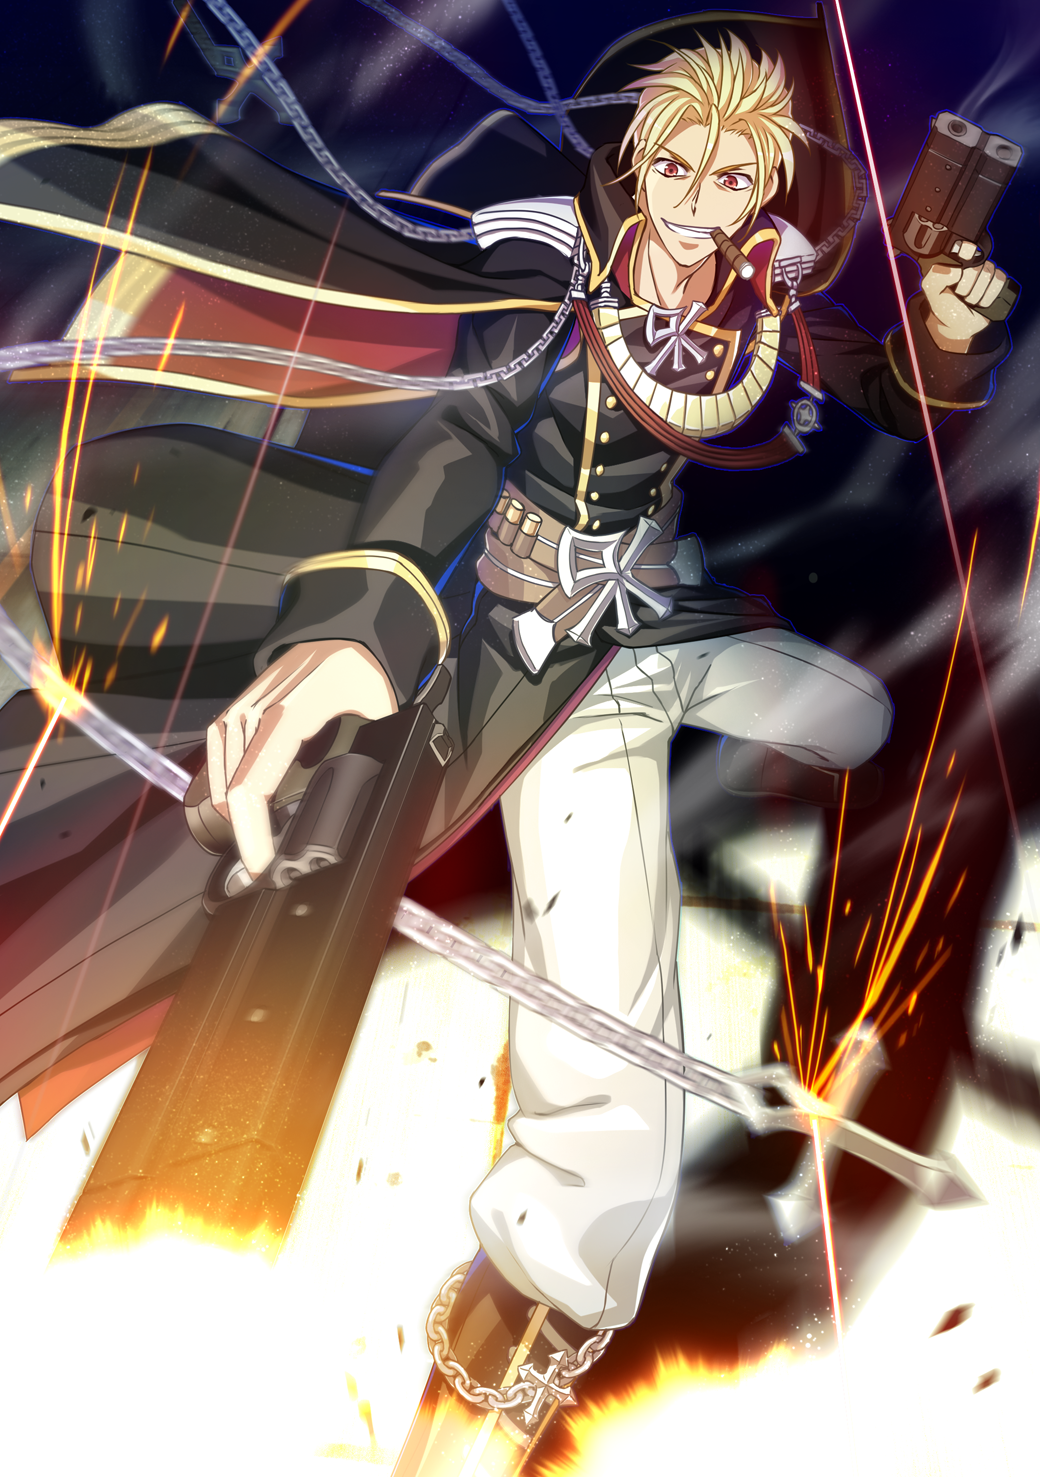 1boy ammunition_belt armor bangs belt black_cape black_coat black_footwear blonde_hair boots buttons cape chain cigar clenched_teeth coat commentary_request cross dual_wielding explosion eyebrows_visible_through_hair finger_on_trigger firing full_body gun hair_between_eyes handgun high_collar highres holding ike_masato leg_up motion_blur pants pauldrons ragnarok_online rebellion_(ragnarok_online) red_cape red_eyes revolver shiny shiny_hair short_hair shoulder_armor smile solo sparks spiky_hair teeth two-sided_cape two-sided_fabric weapon white_pants